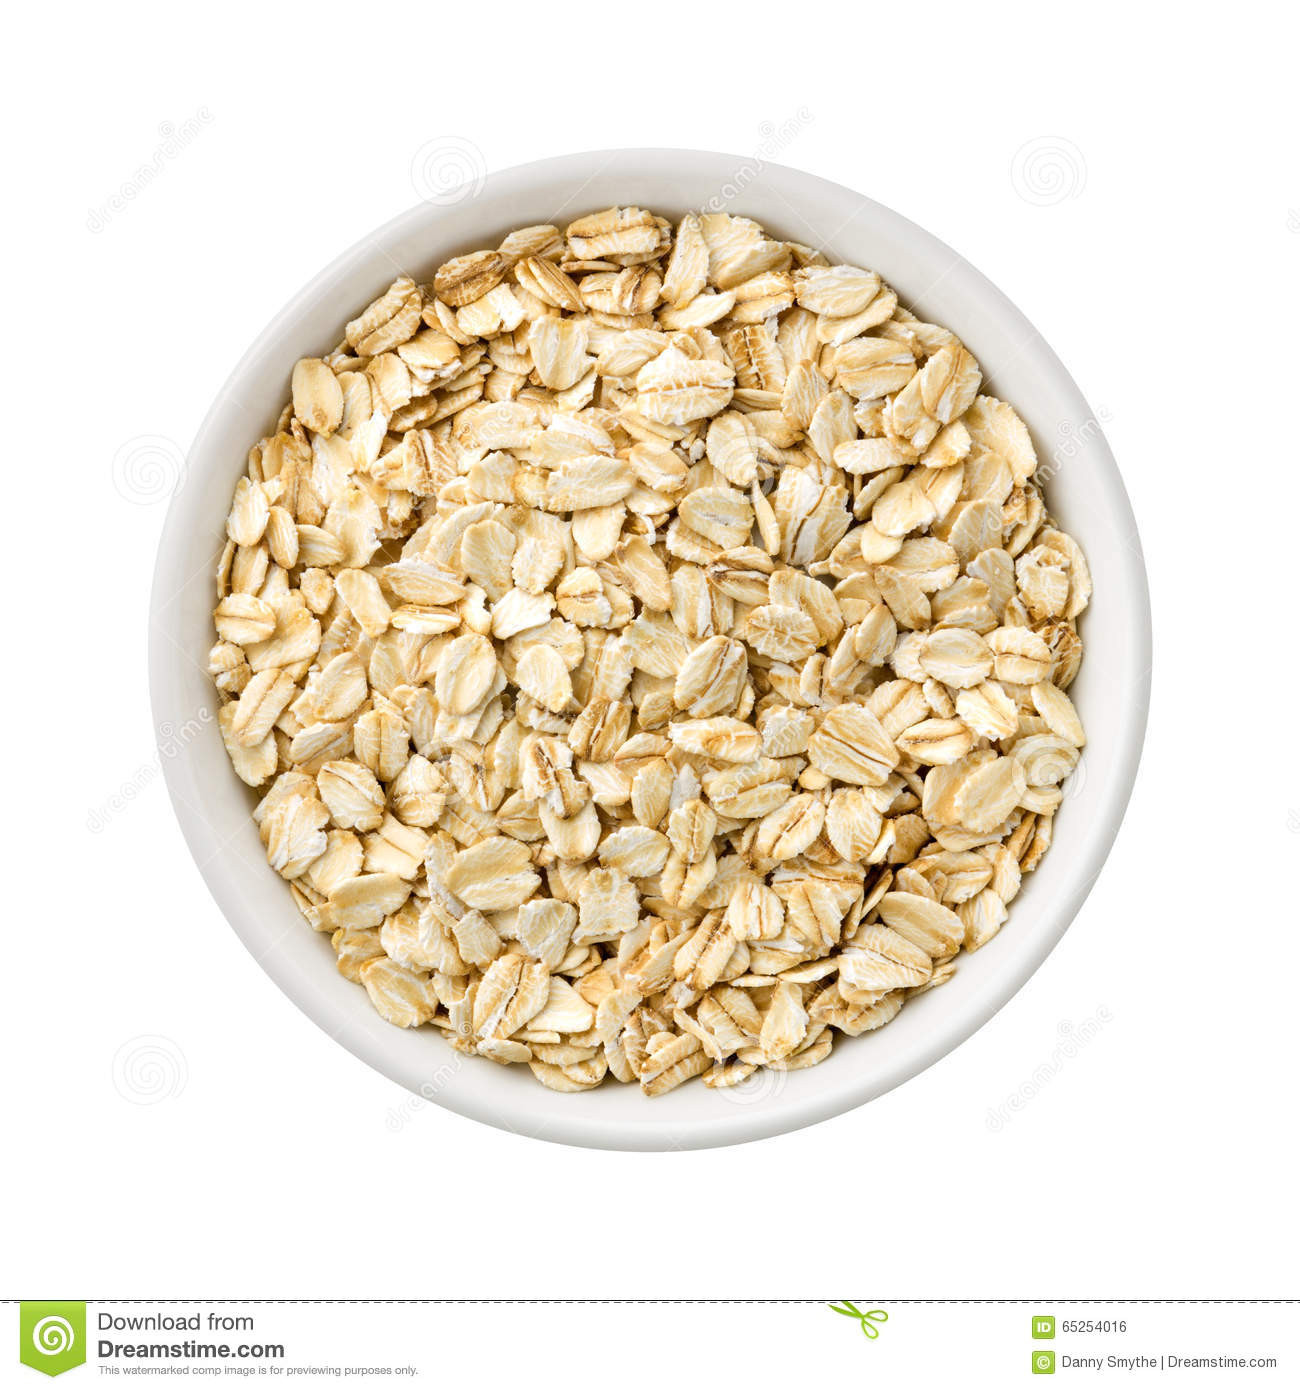 Fiber In Rolled Oats
 Organic Rolled Oats In A Ceramic Bowl Stock Image